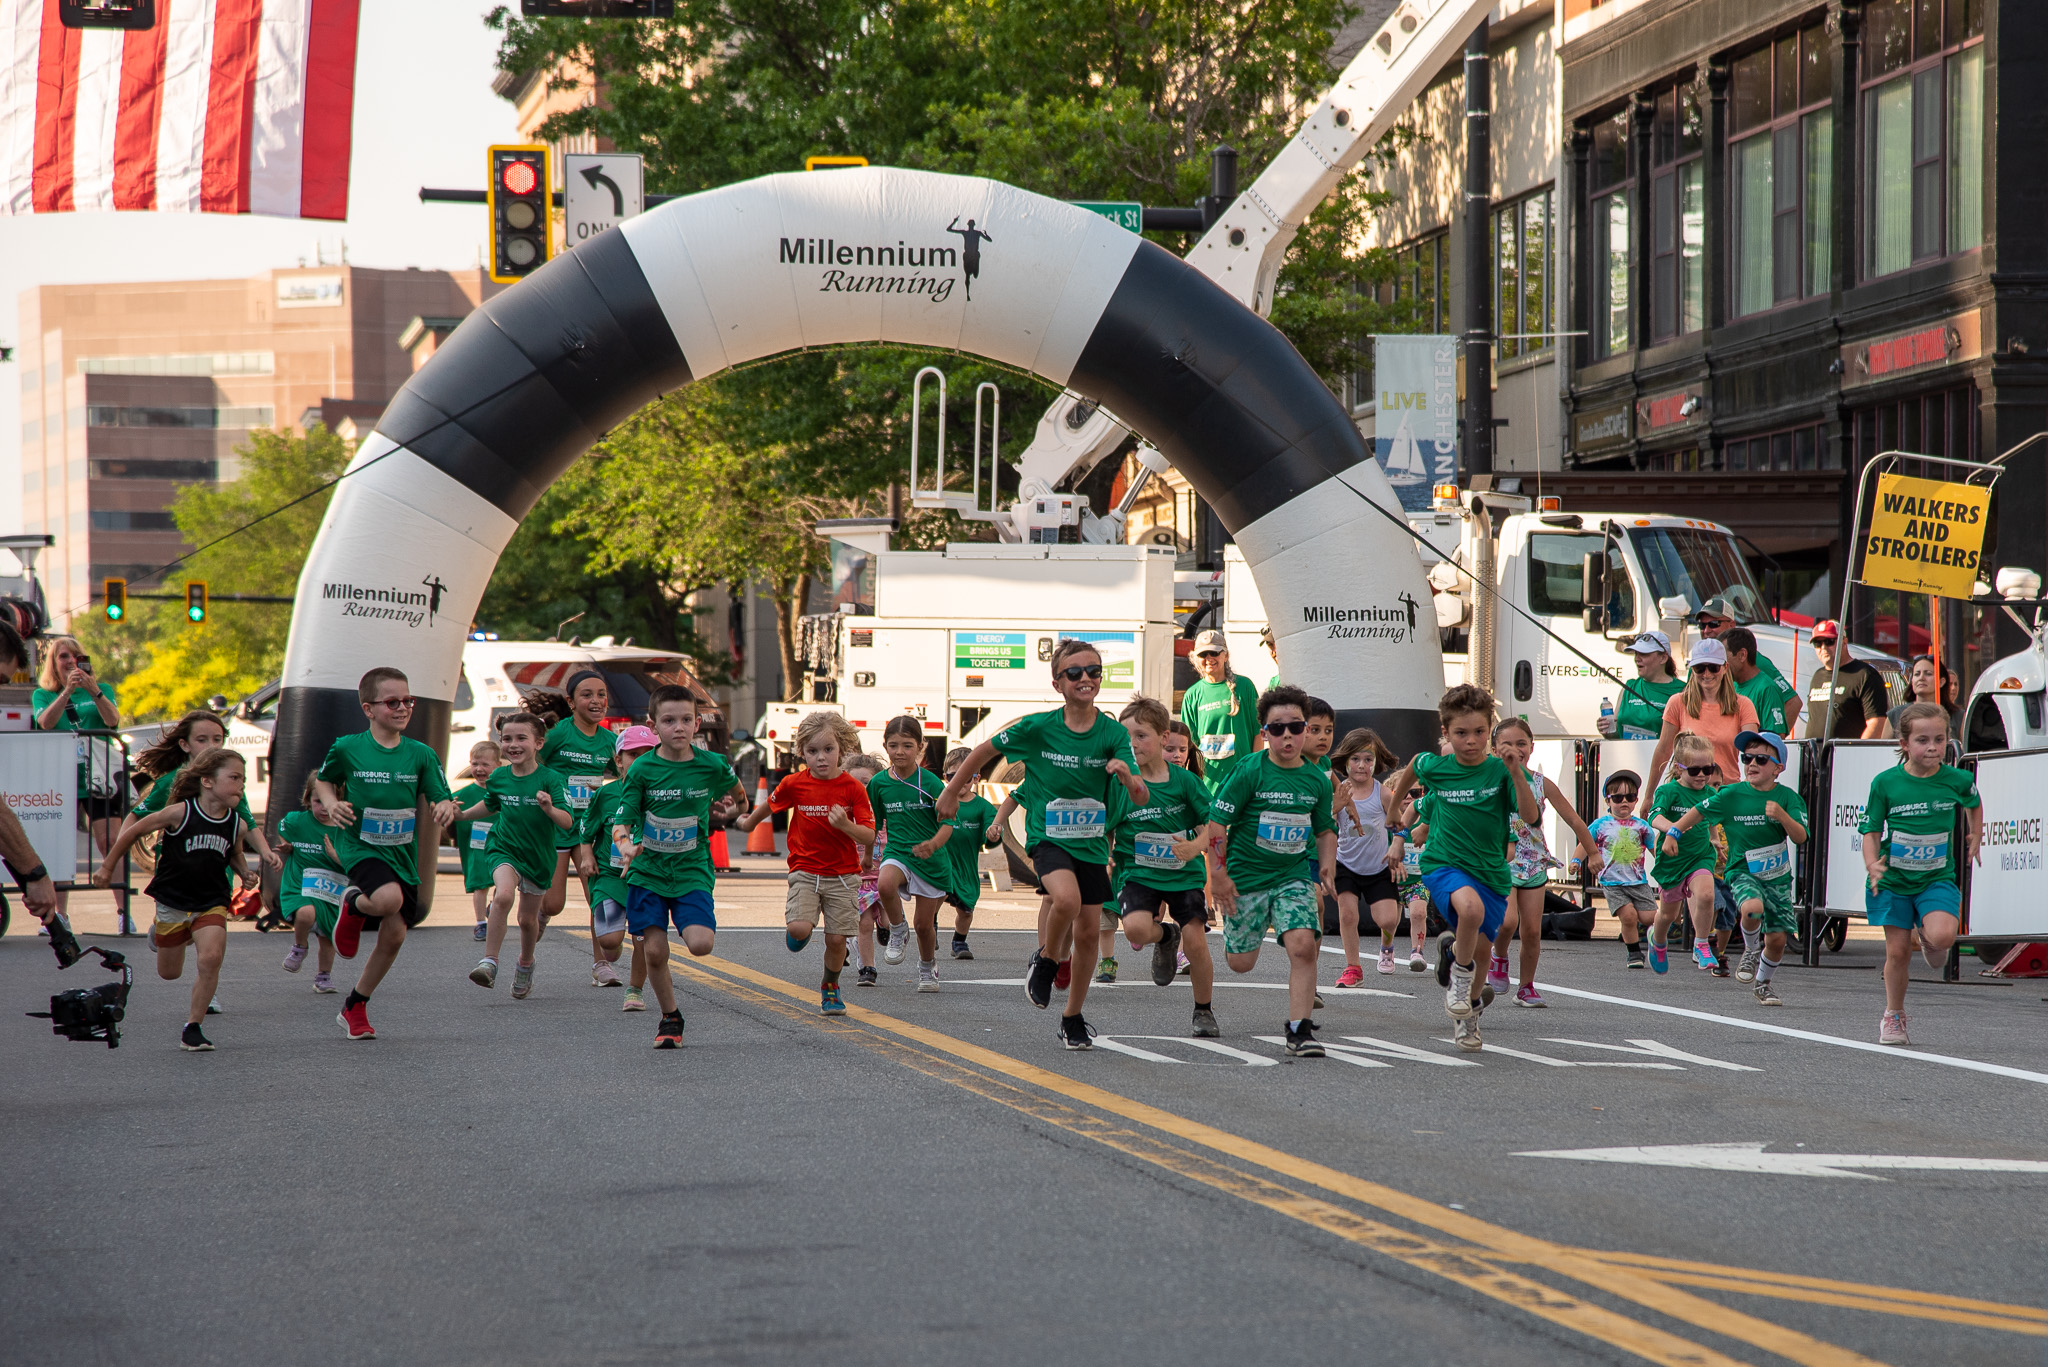 a group of children set off from a starting line under a blow-up arch to begin their run